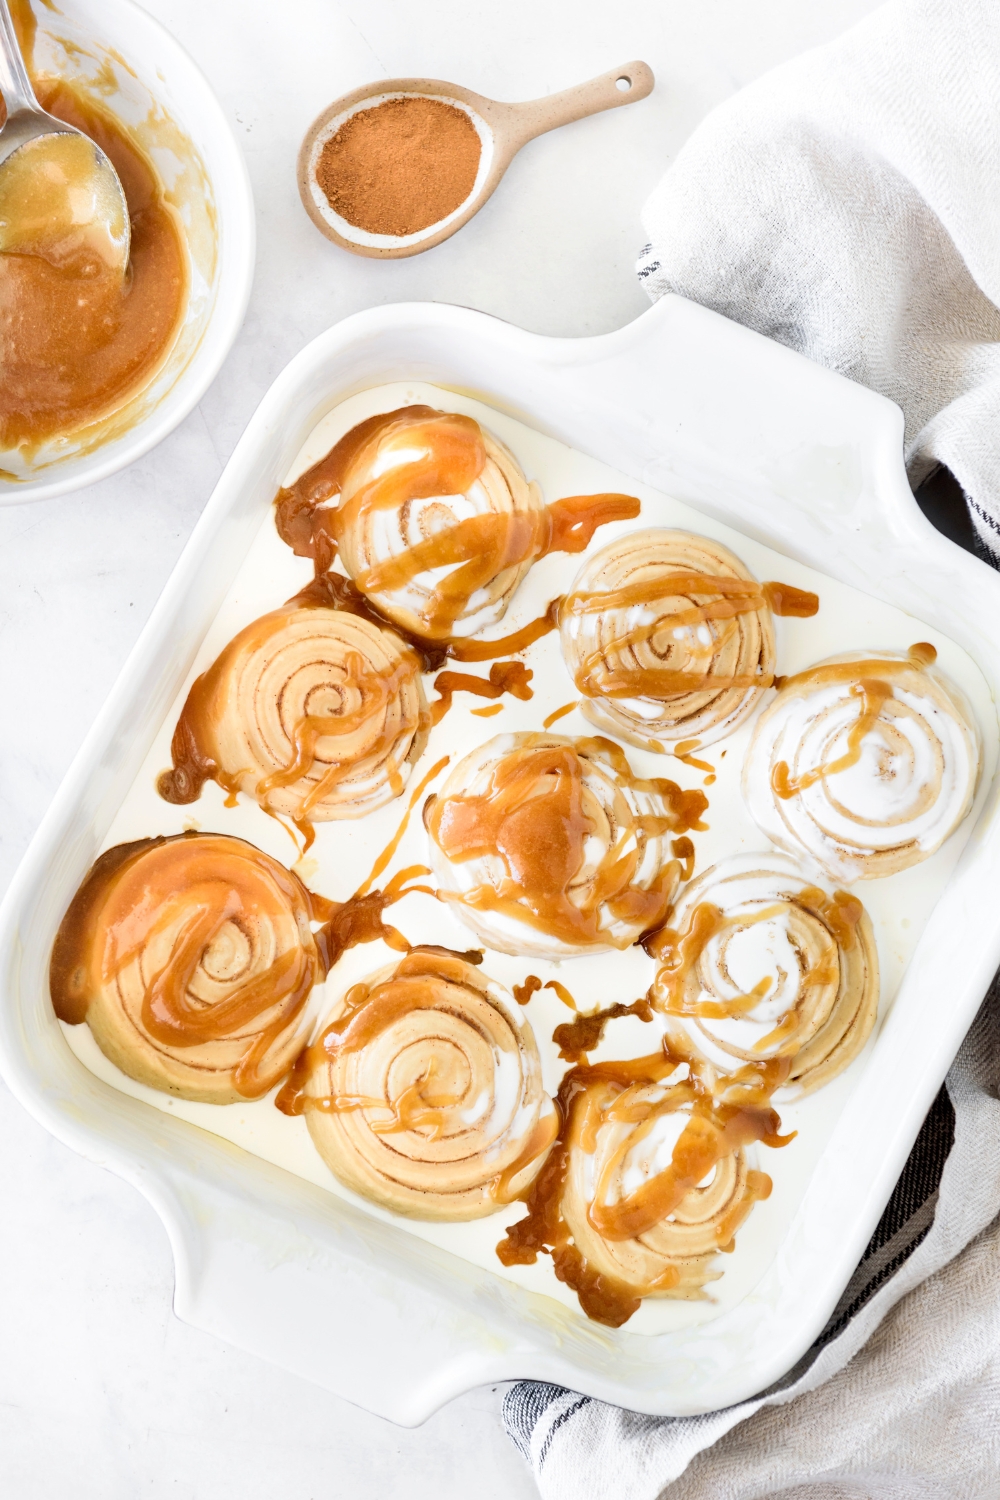 A baking dish filled with nine evenly-space cinnamon rolls covered in cream and drizzled with a brown sugar glaze.